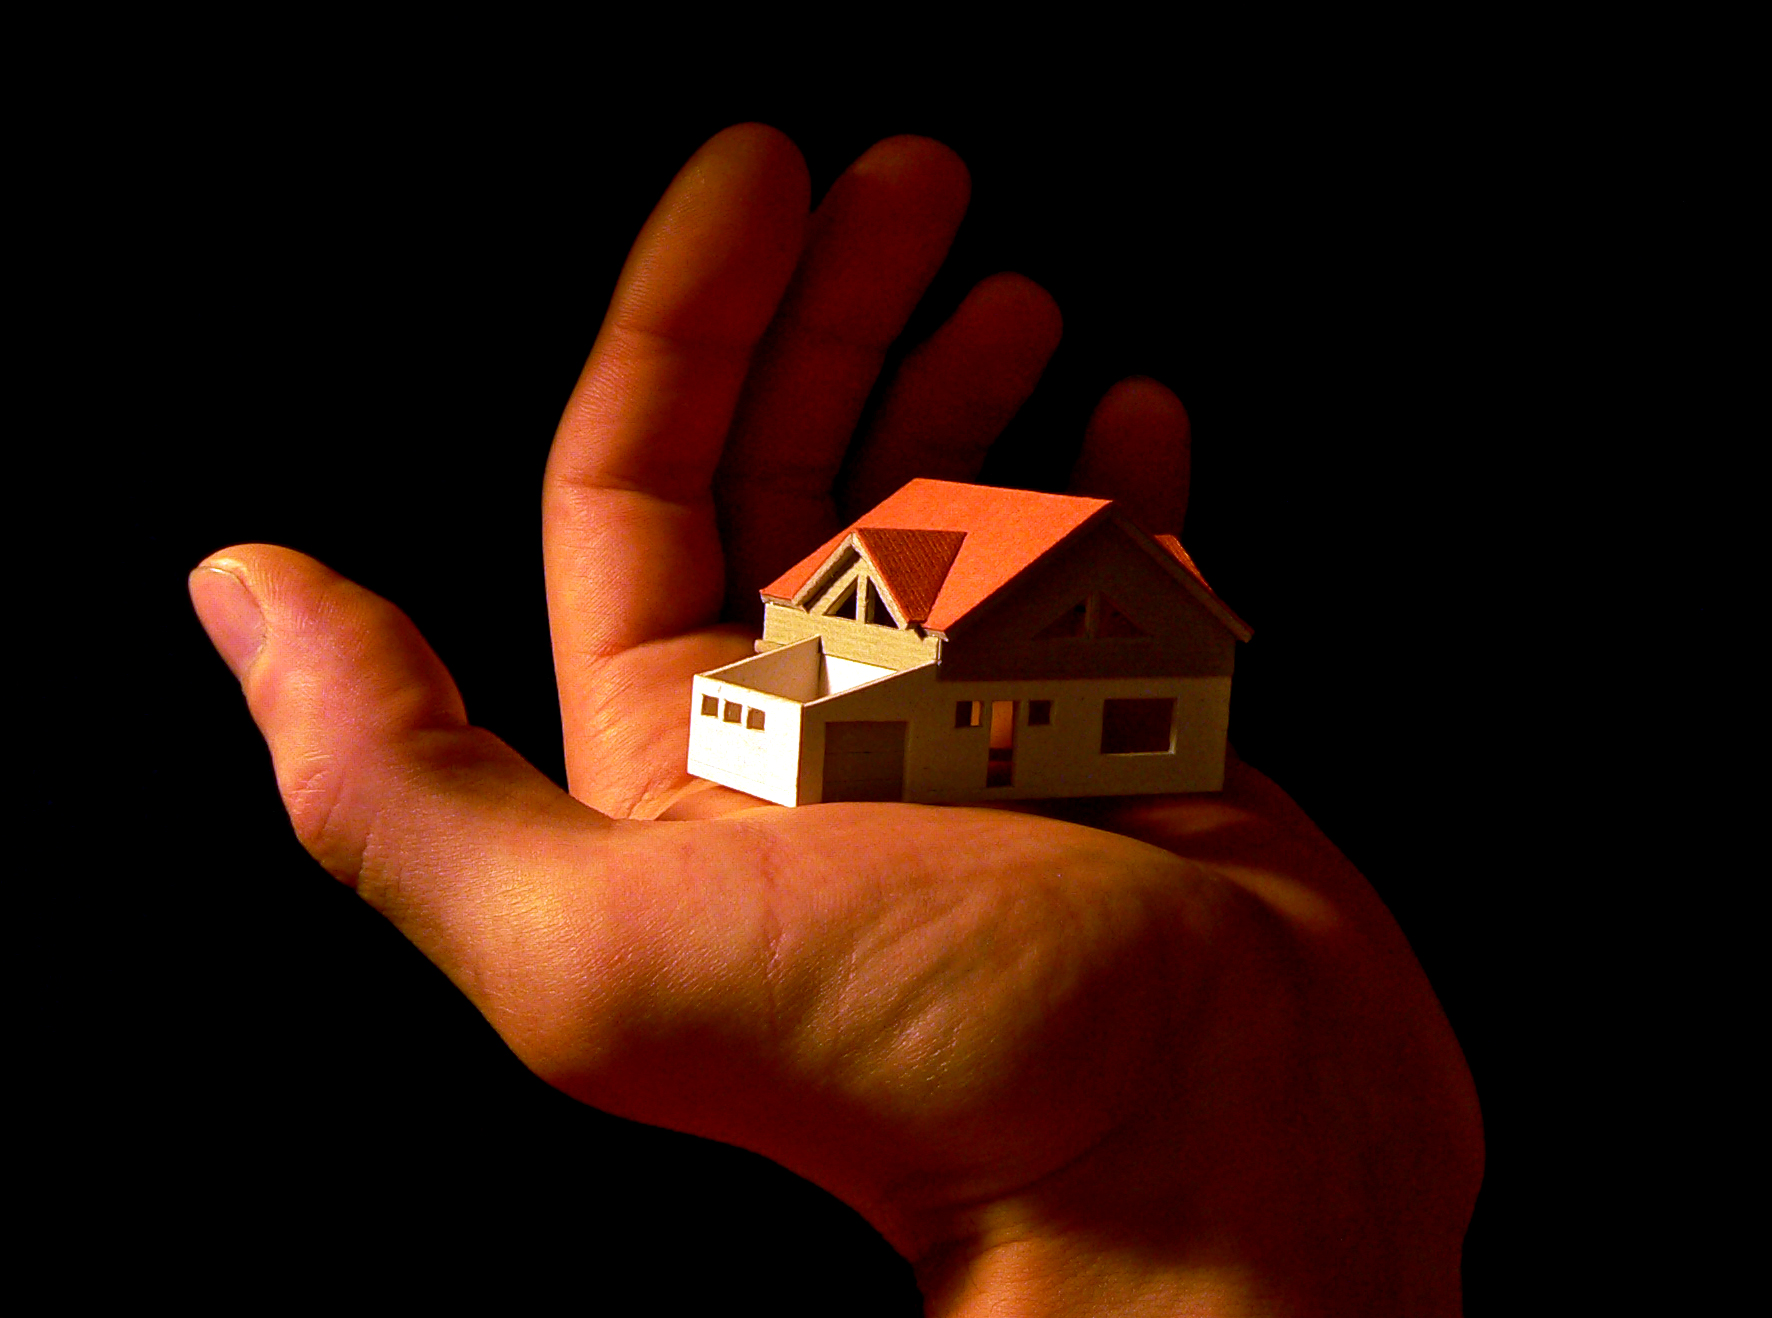 House model in the palm of a man's hand